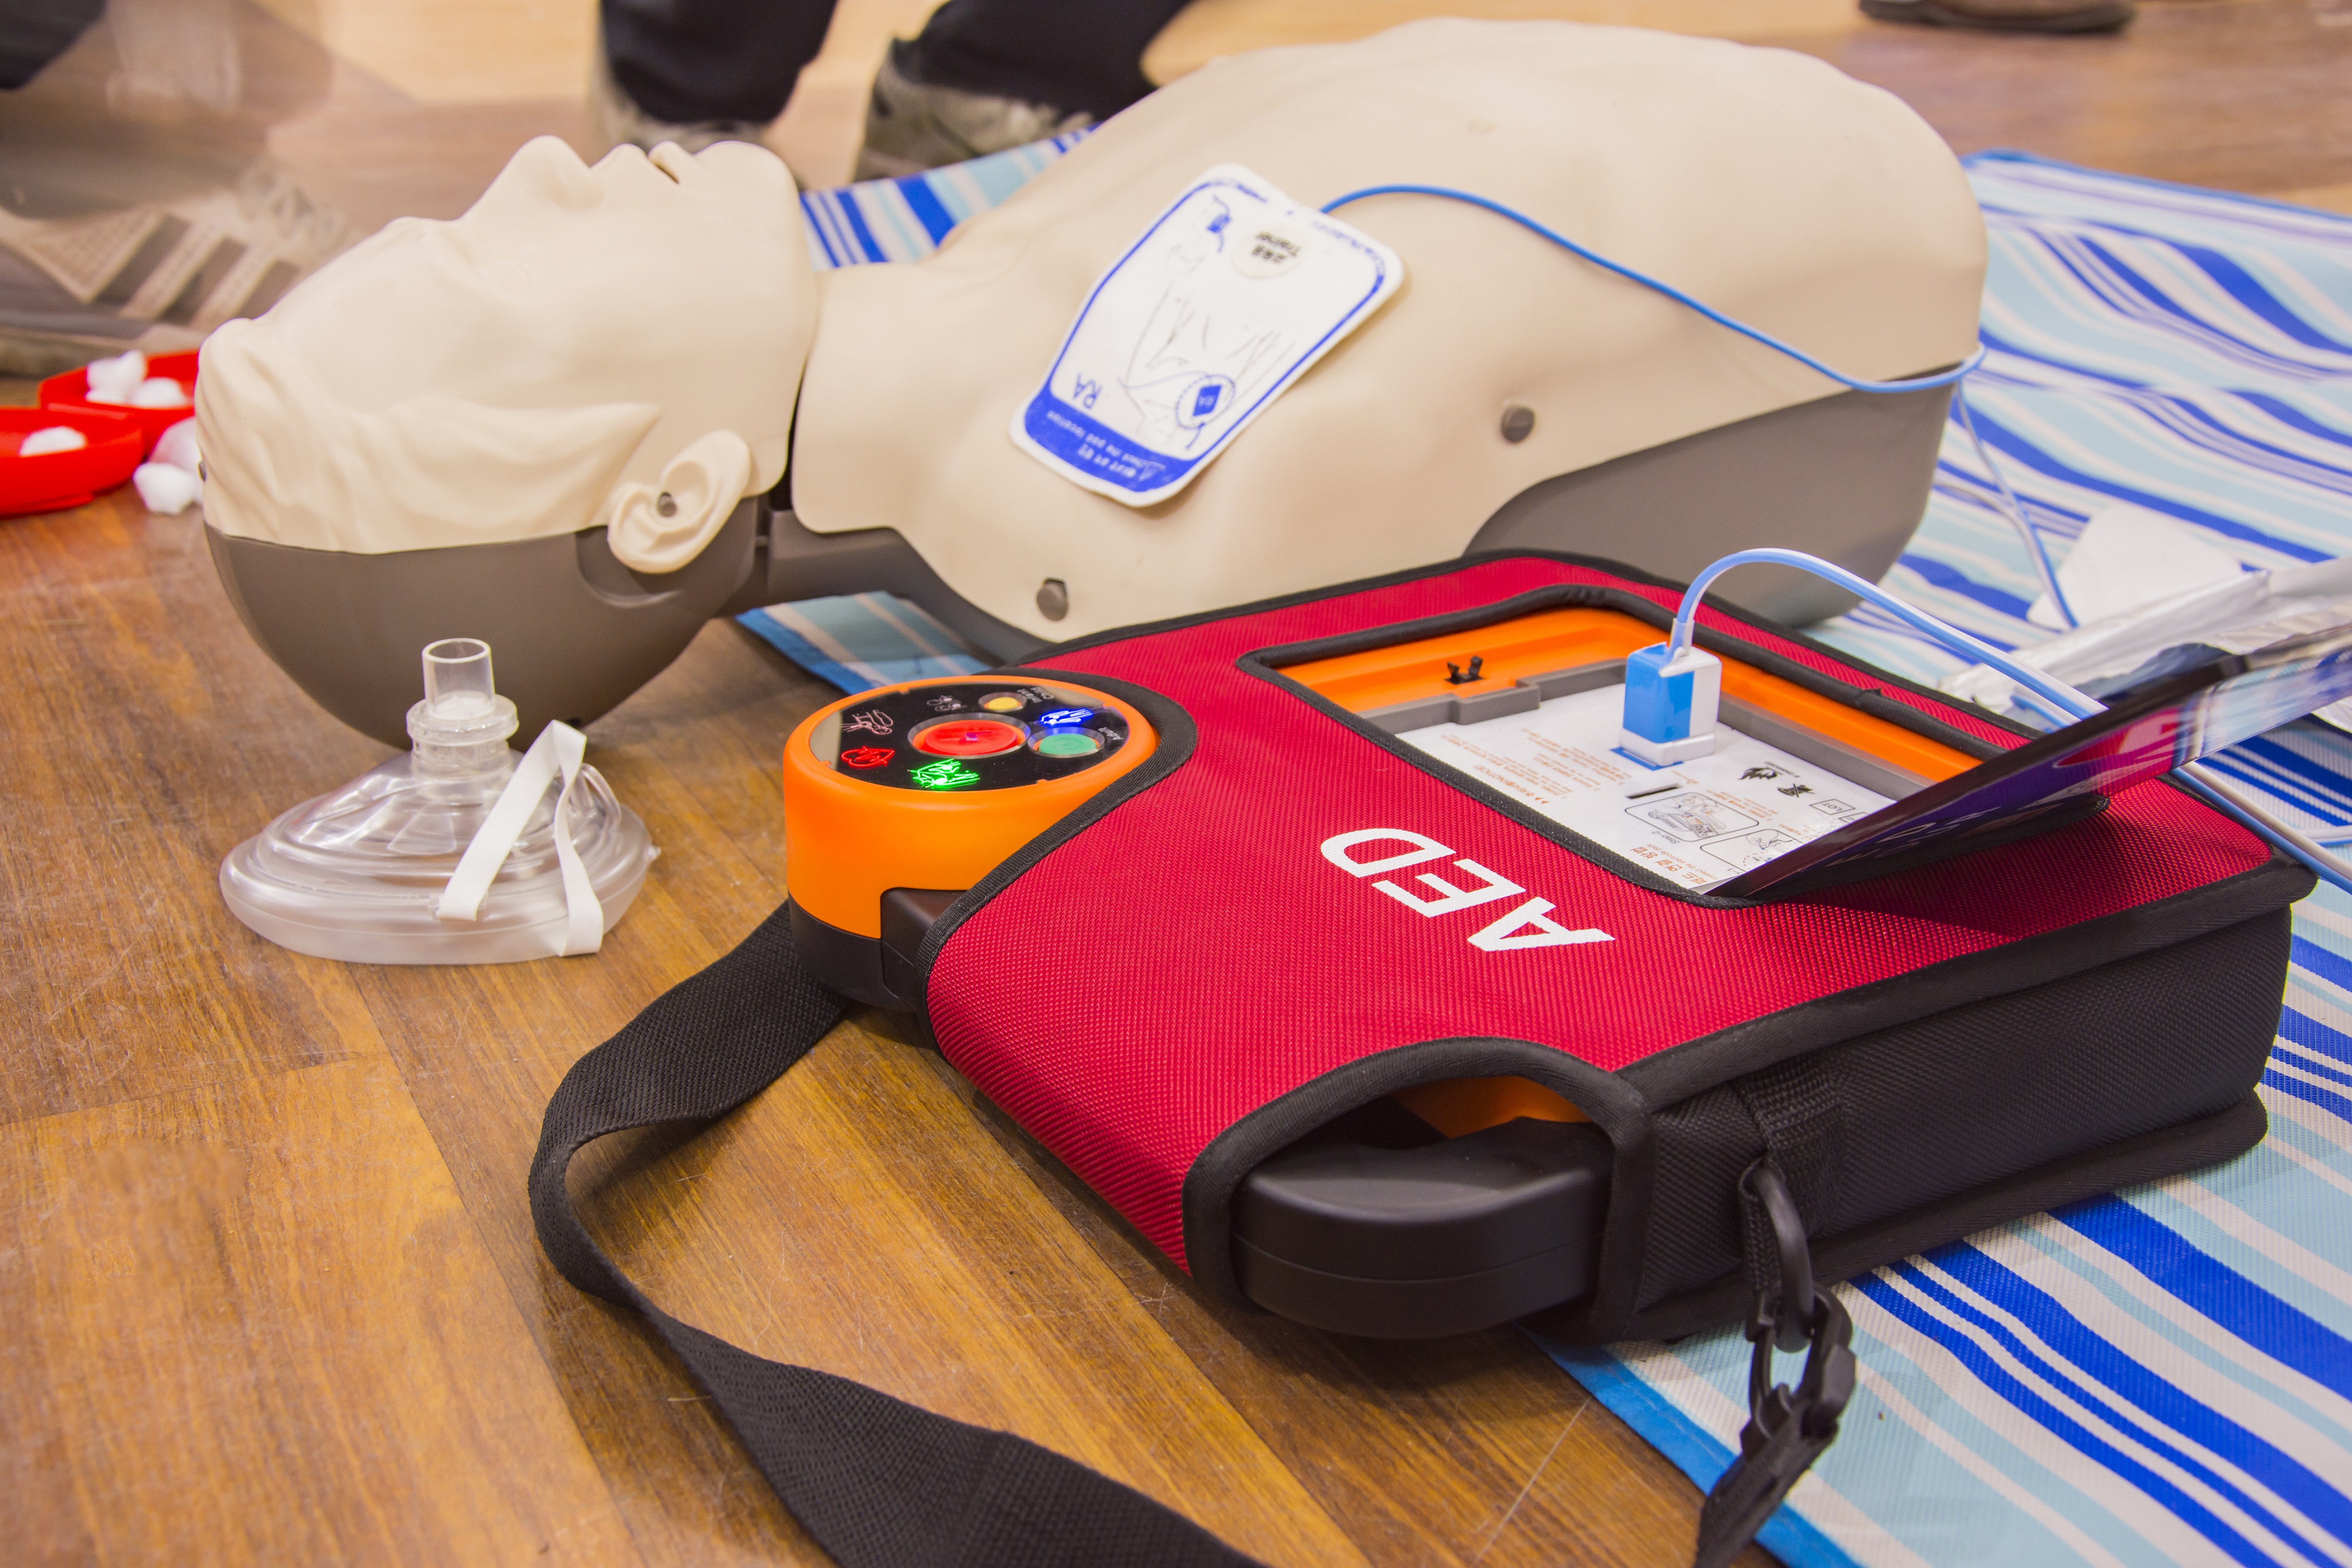 CPR AED First Aid Training Class October 8, 2022 in Salem